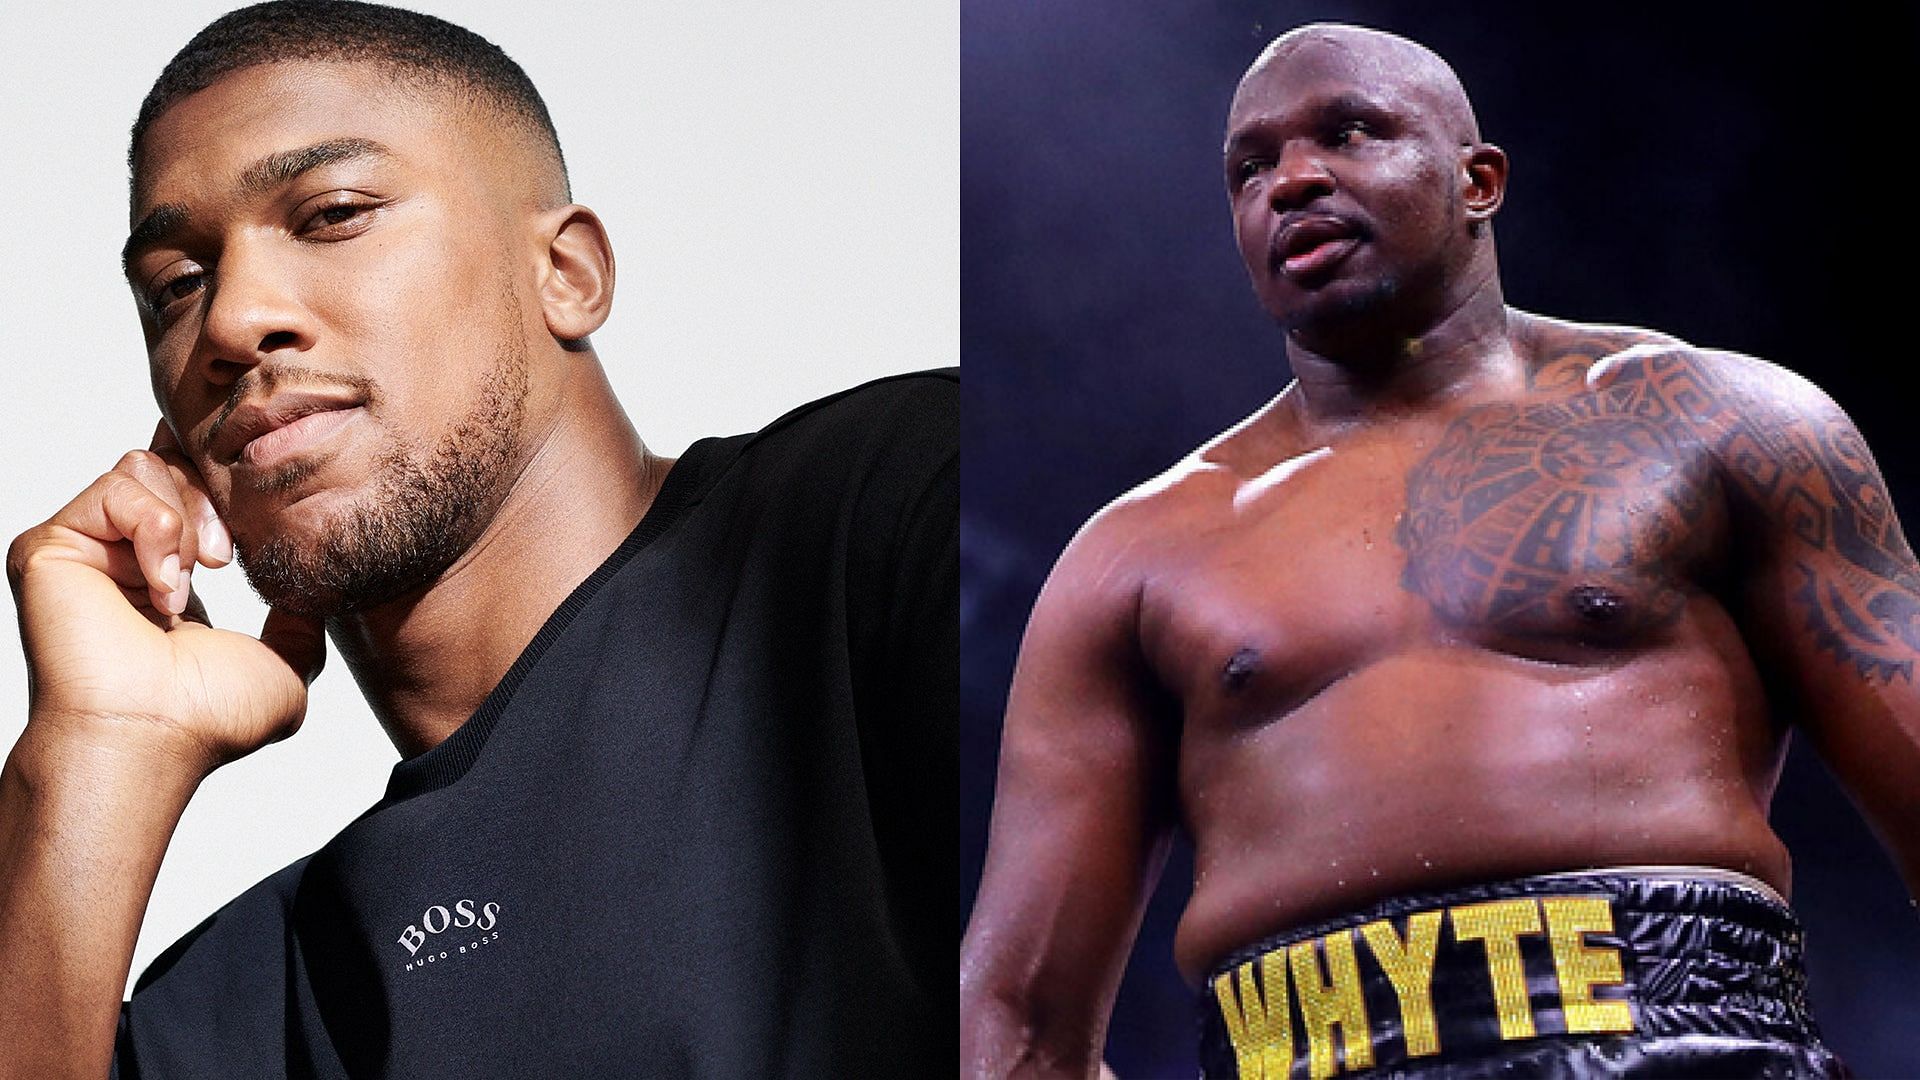 Anthony Joshua (left) and Dillian Whyte (right)